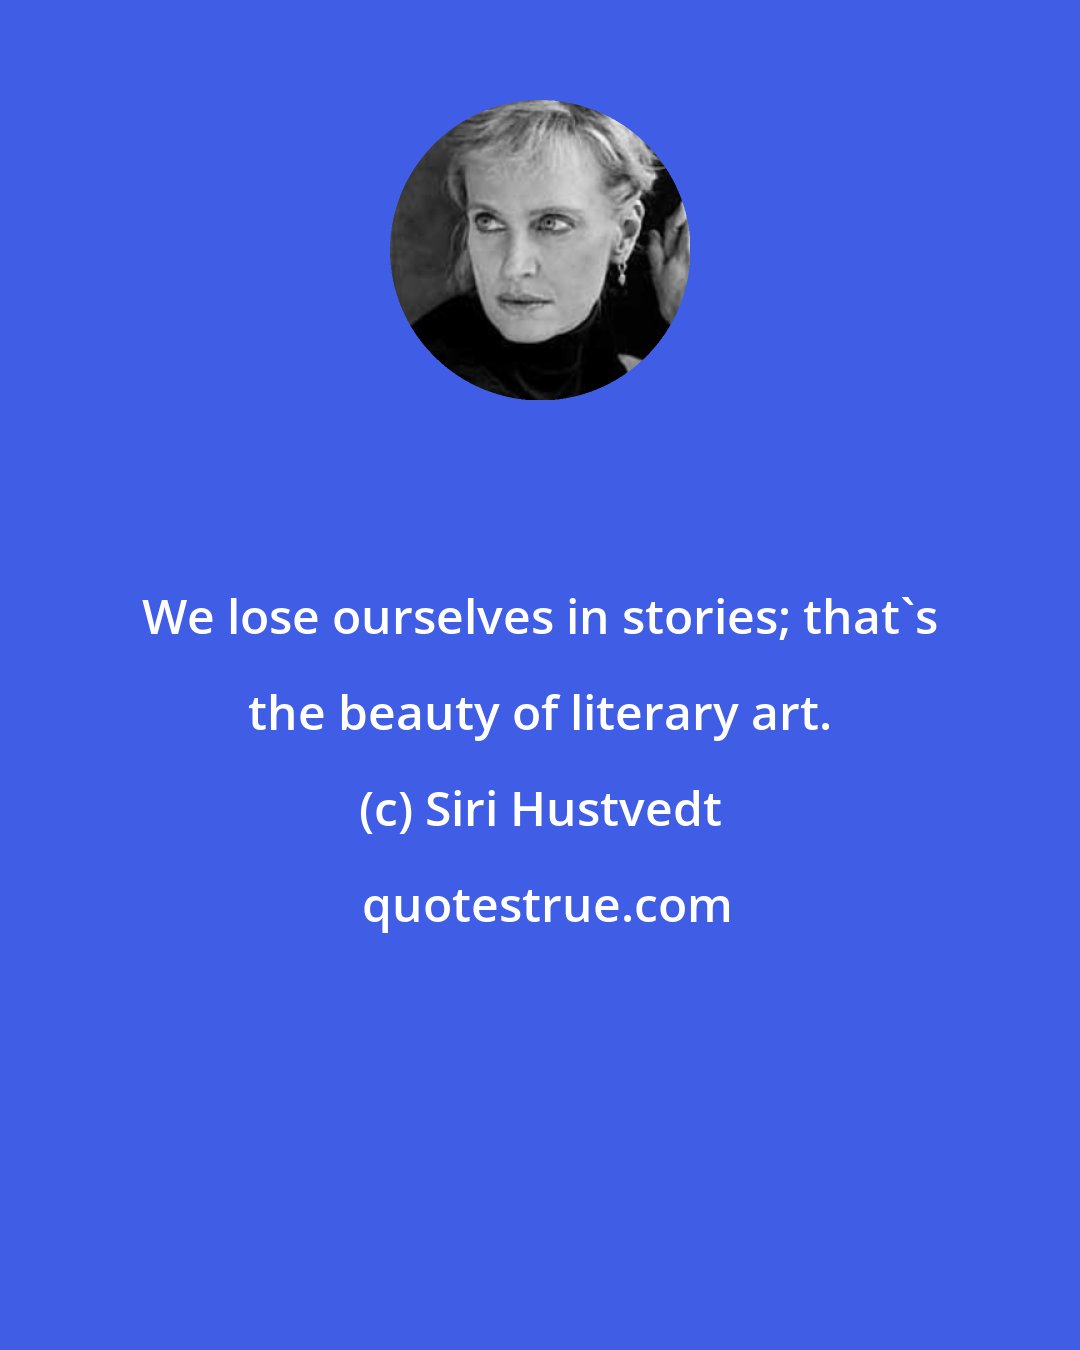 Siri Hustvedt: We lose ourselves in stories; that's the beauty of literary art.